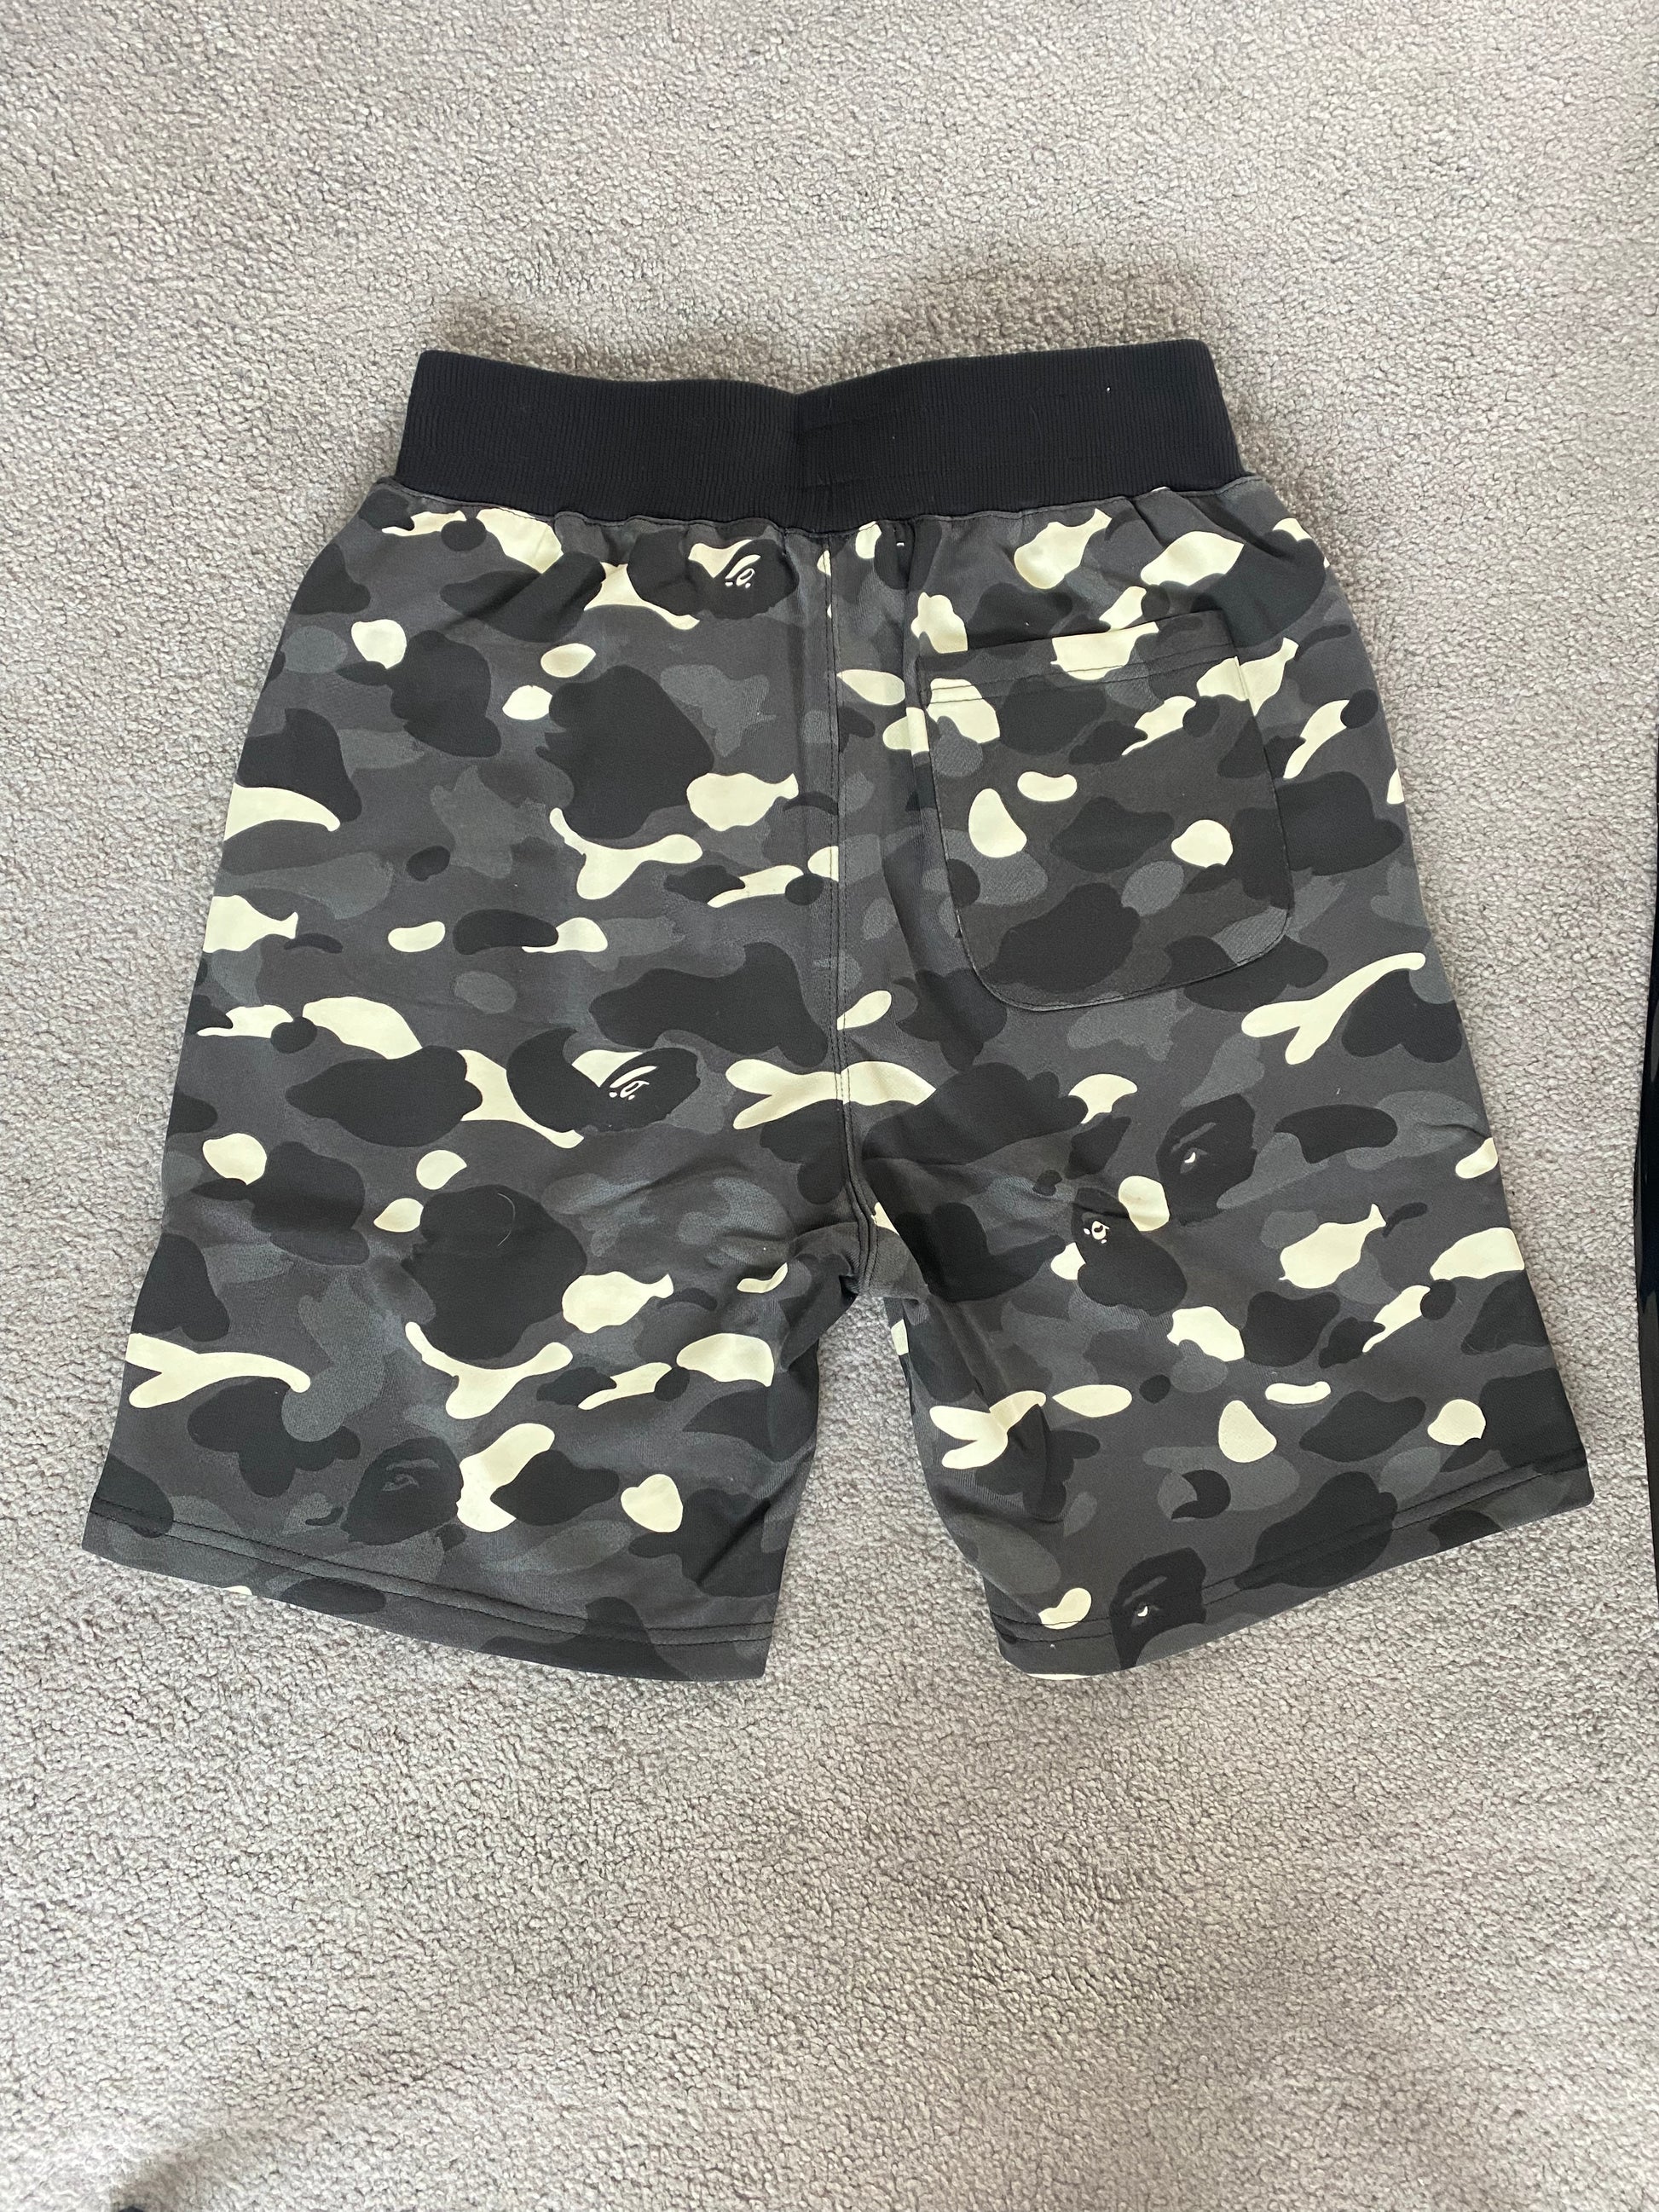 BAPE Black Camo Glow In The Dark Shorts - Icy Clothes Ro